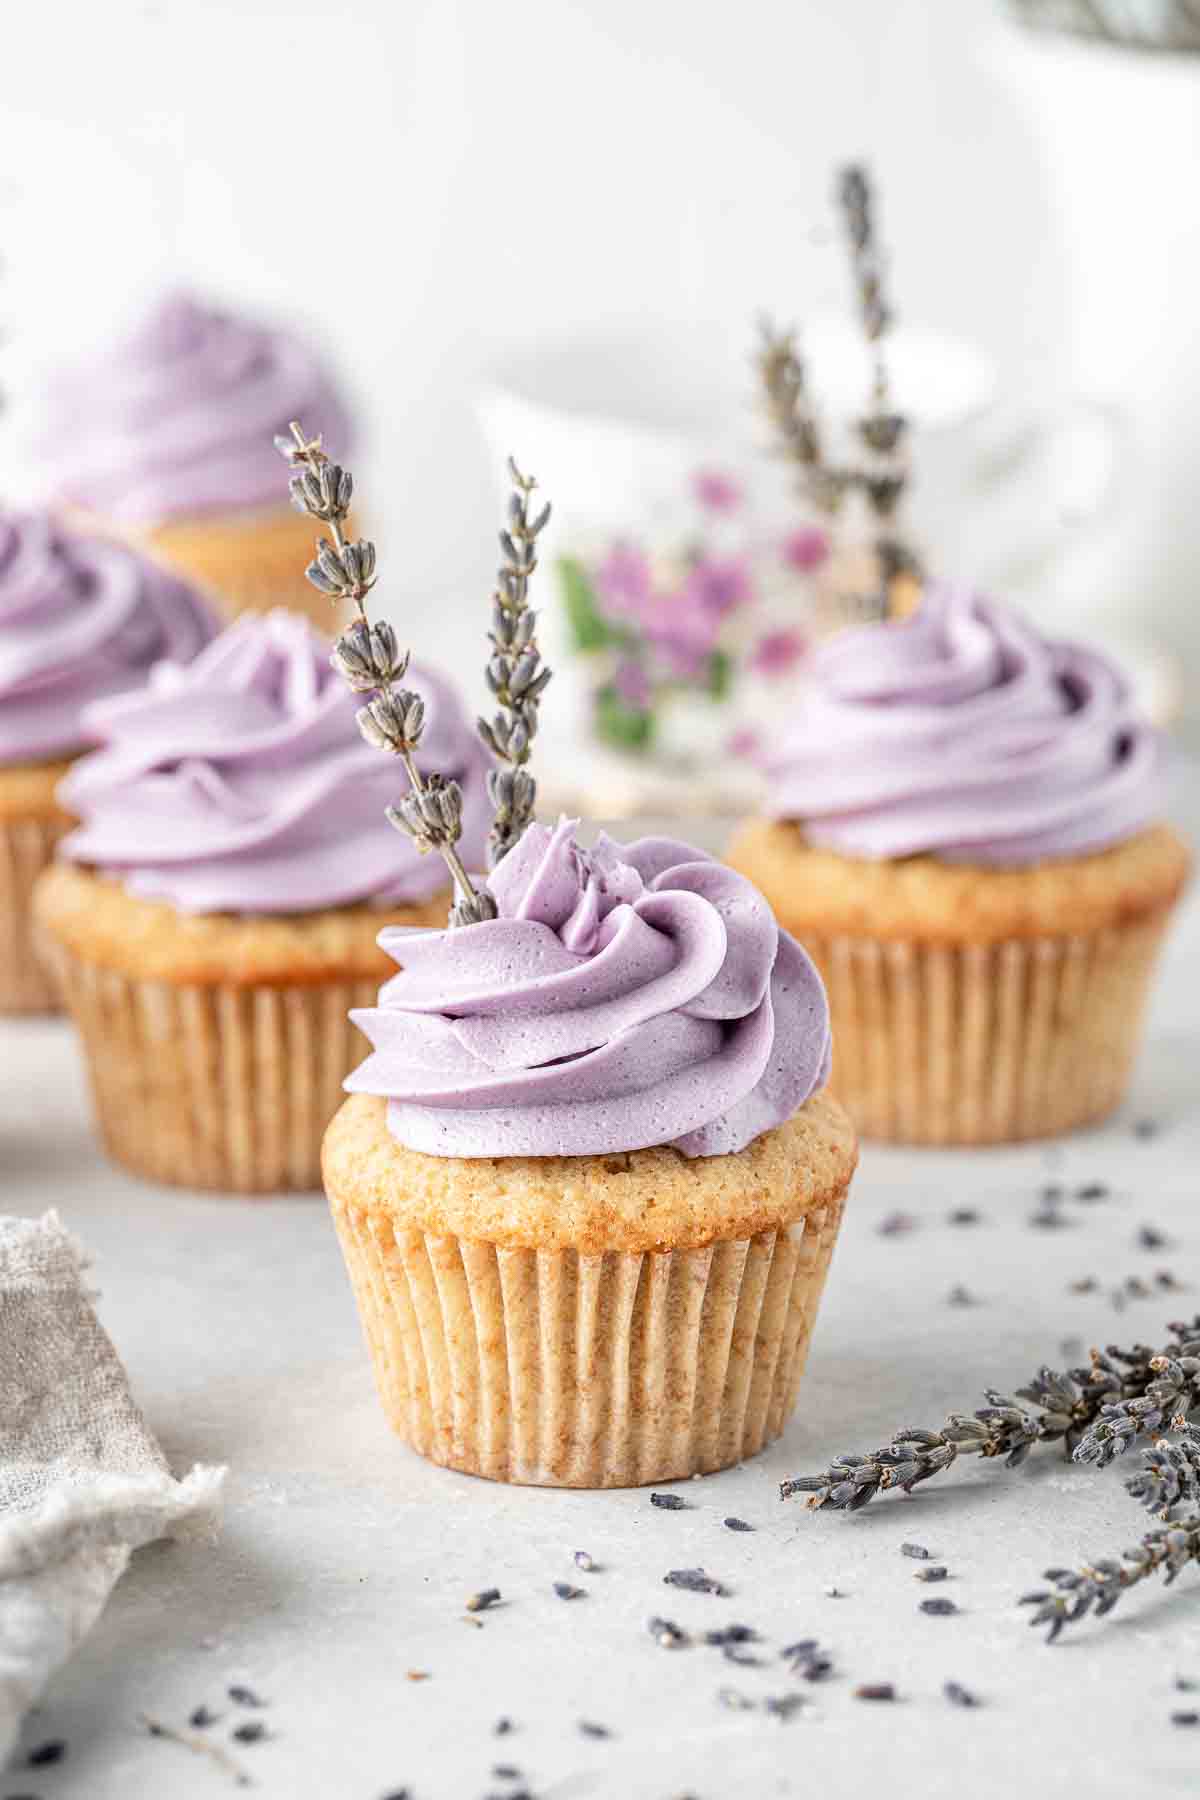 Early grey cupcakes with lavender buttercream.